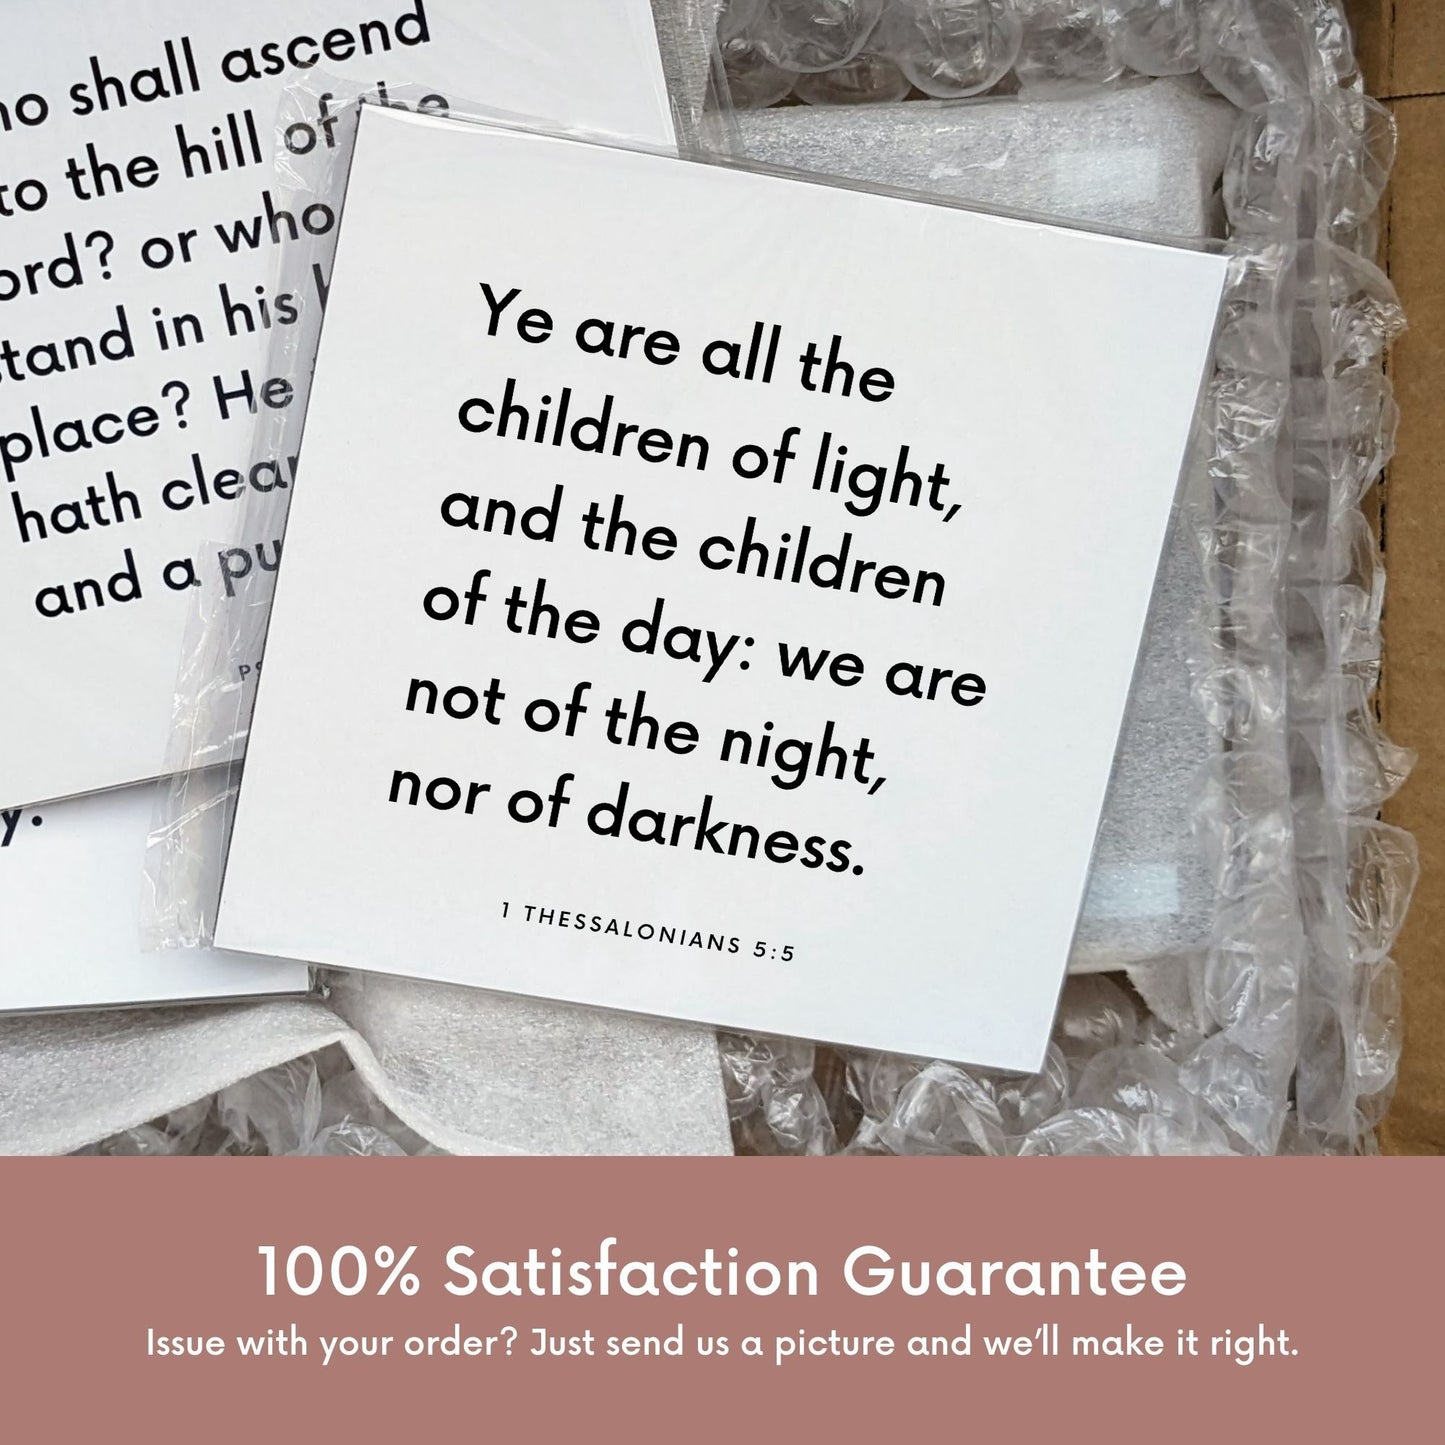 Shipping materials for scripture tile of 1 Thessalonians 5:5 - "Ye are all the children of light, and the children of the day"